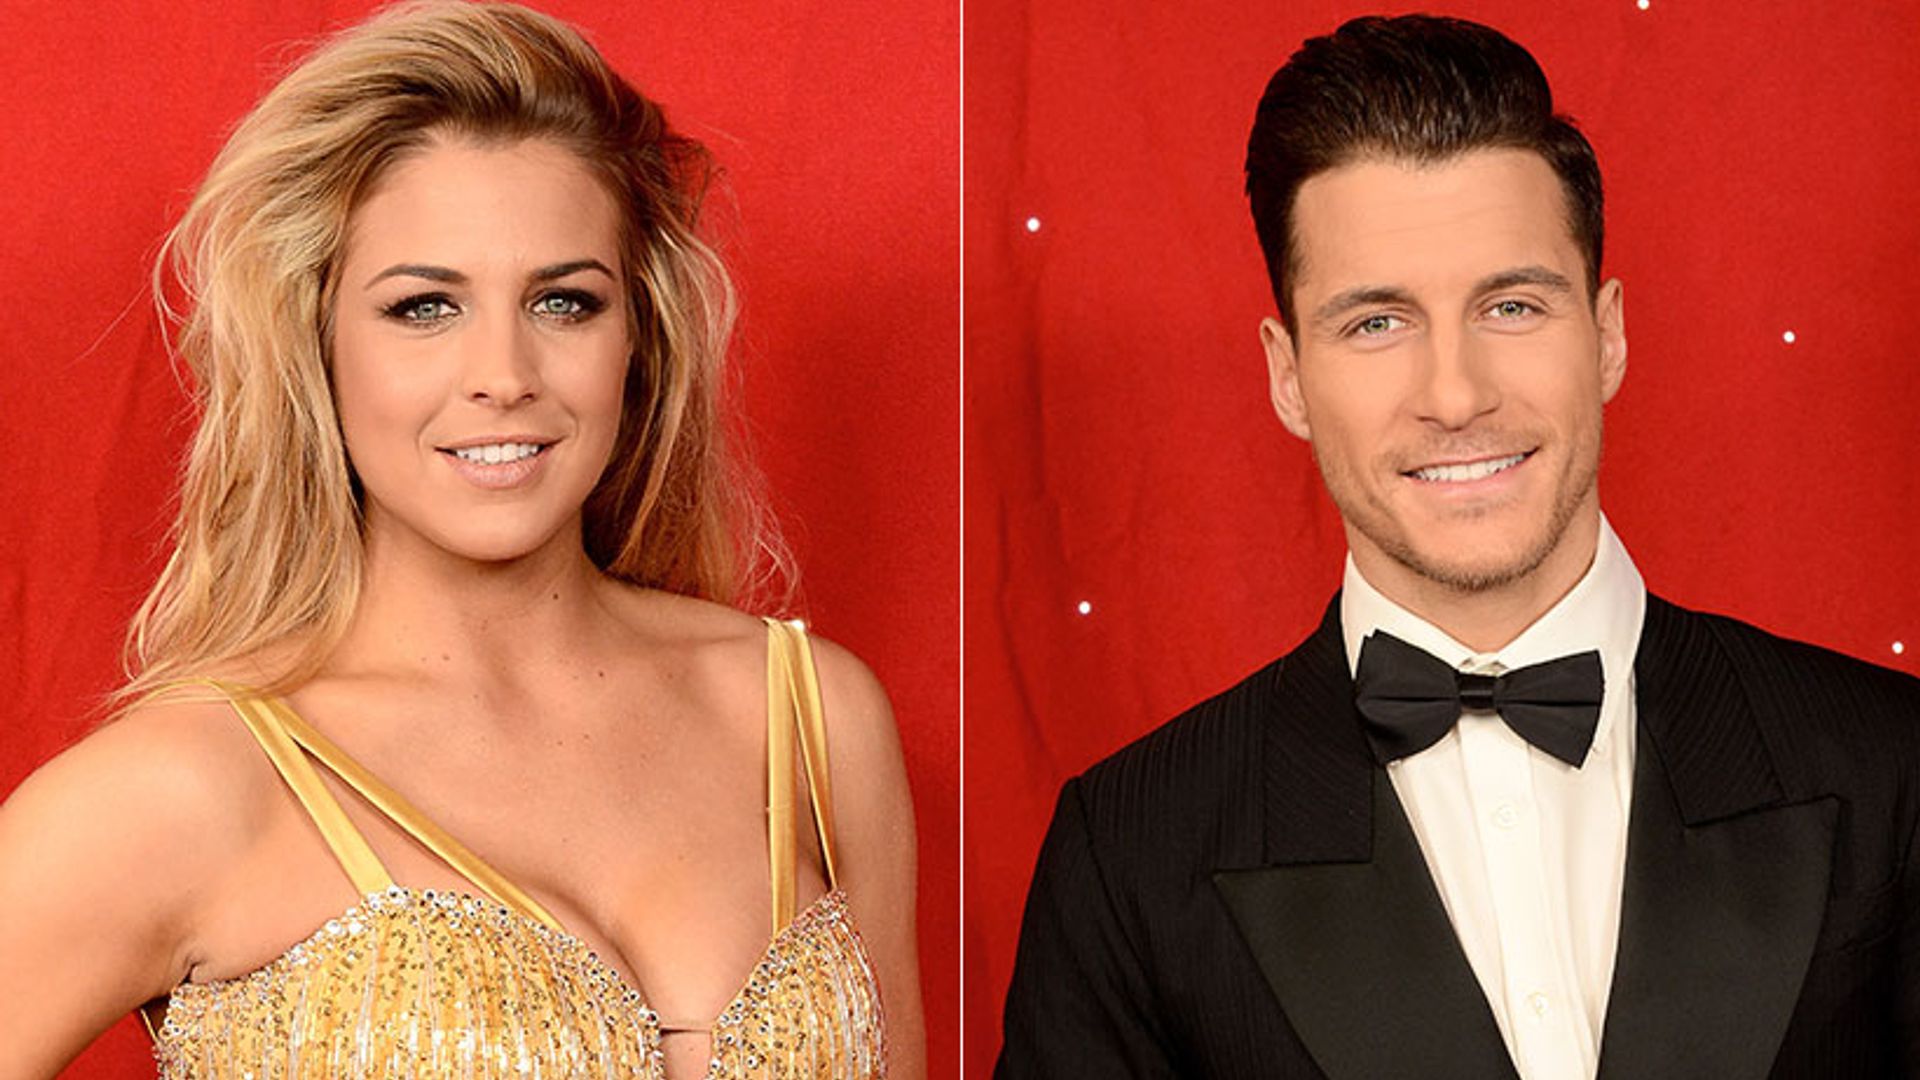 Strictly's Gemma Atkinson and Gorka Marquez finally appear to confirm romance